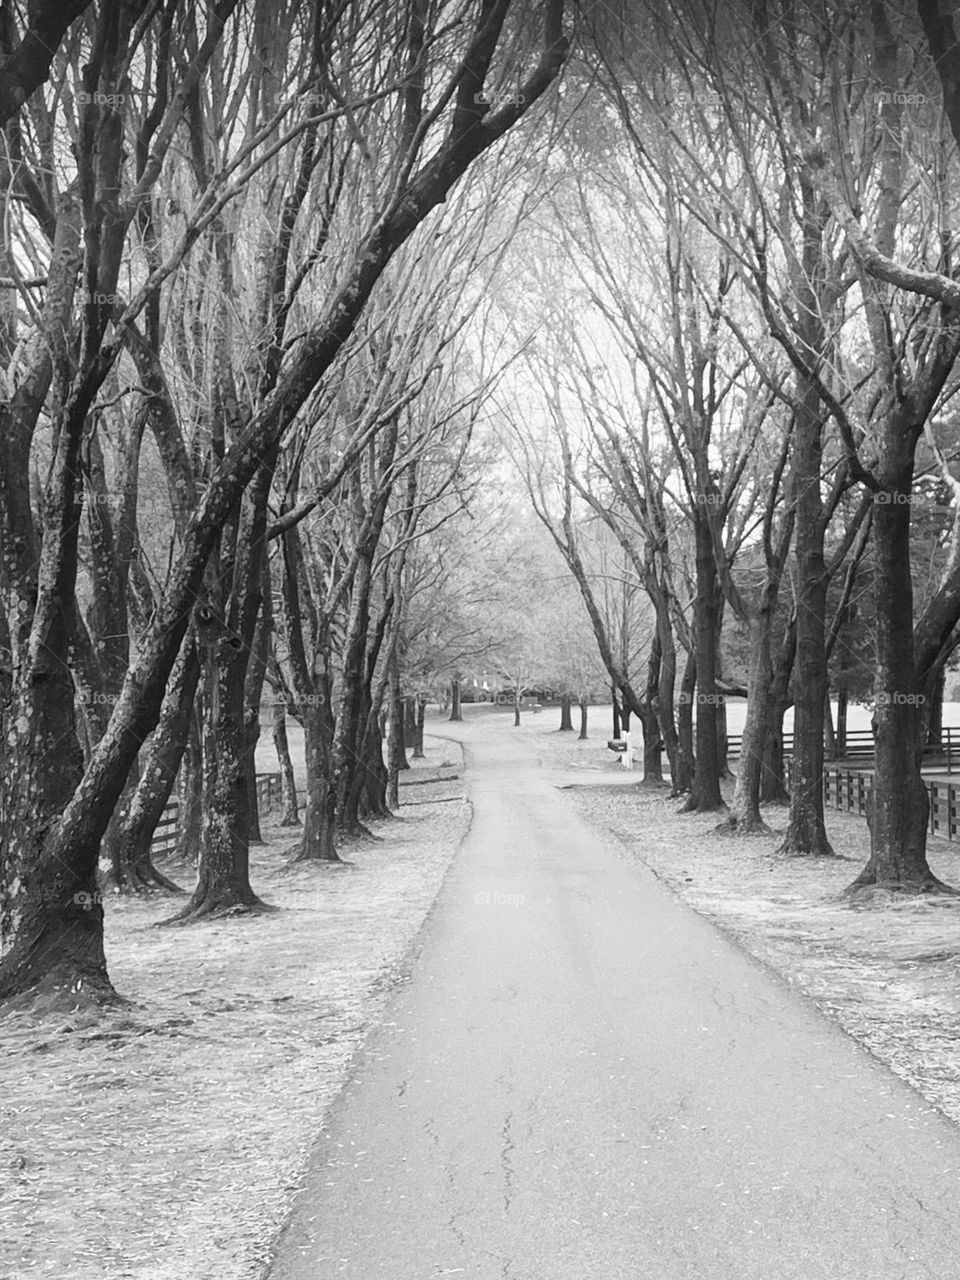 Arched trees B&w 